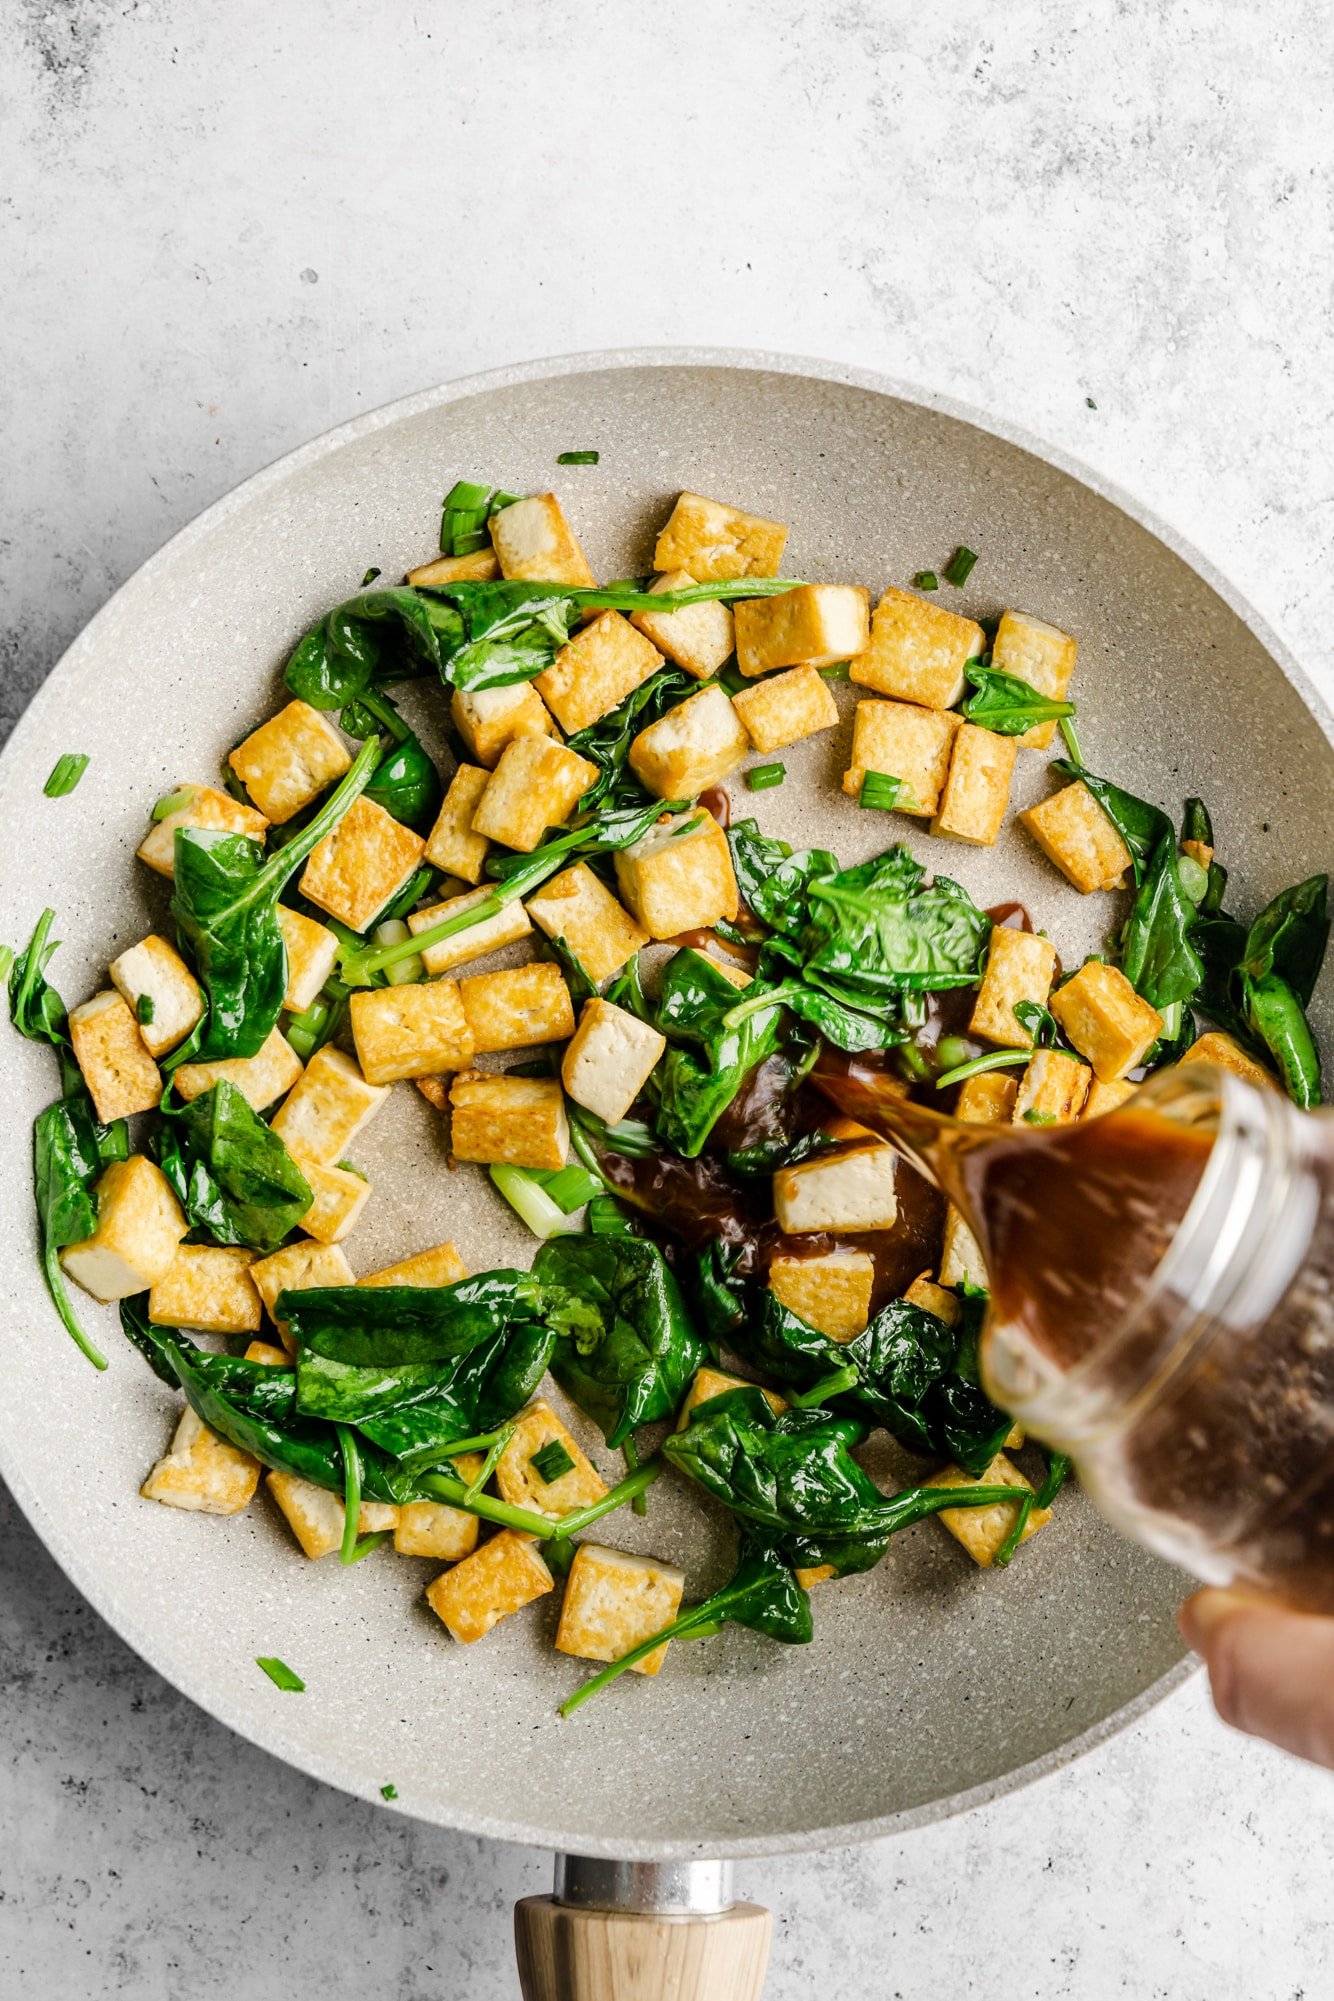 Pouring stir fry sauce in a grey skillet with tofu and spinach.